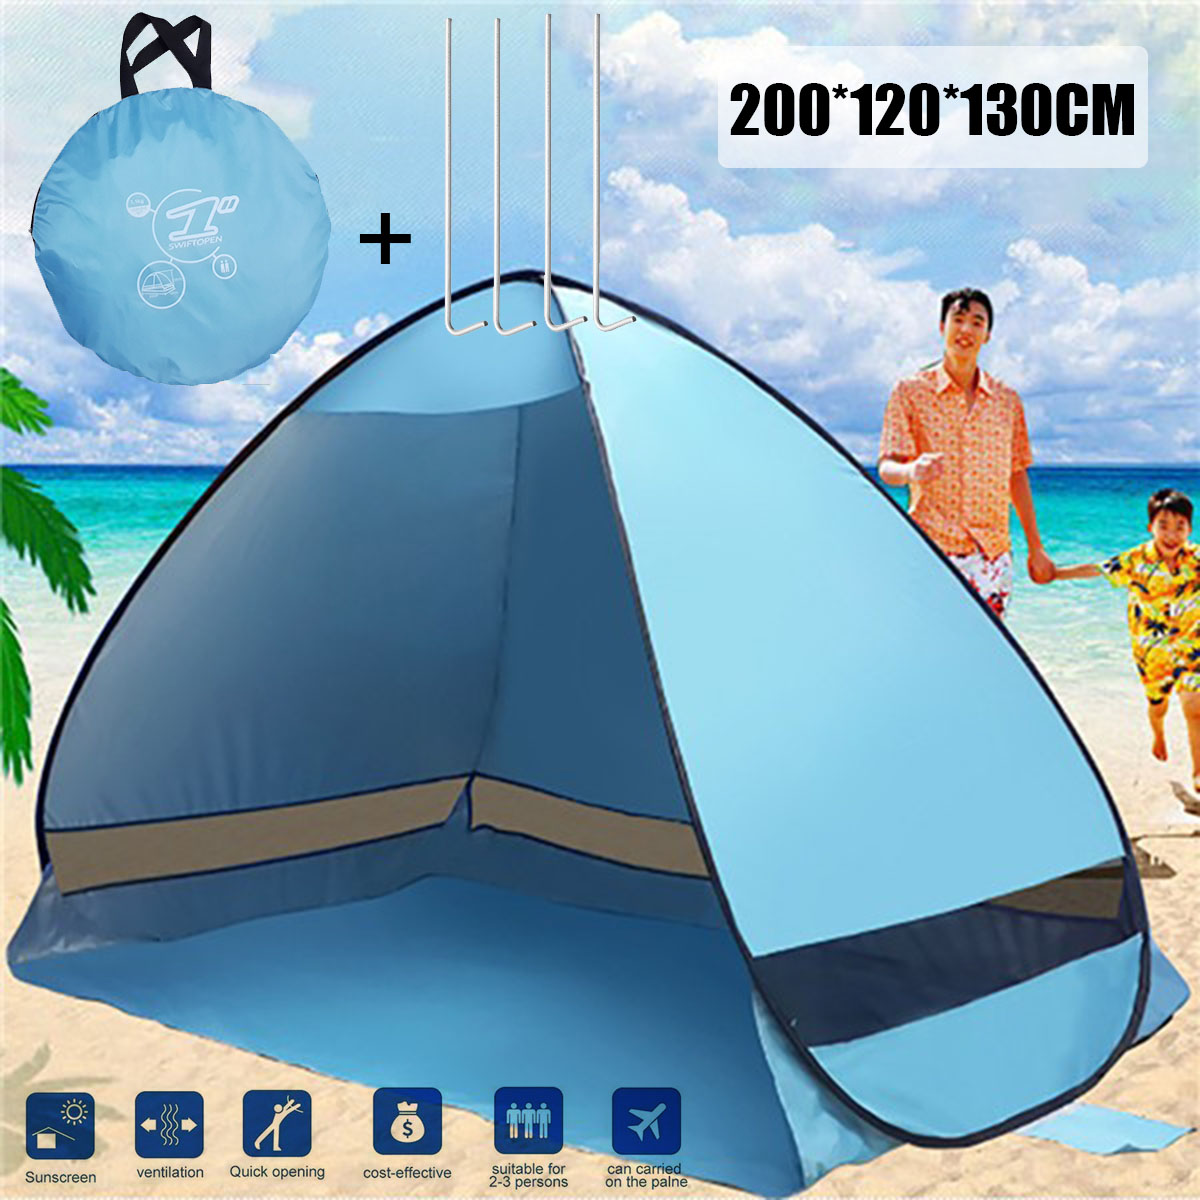 1-2-People-Outdoor-Instant-Pop-up-Portable-Beach-Tent-Camping-Anti-UV-Sunshade-Shelter-1305522